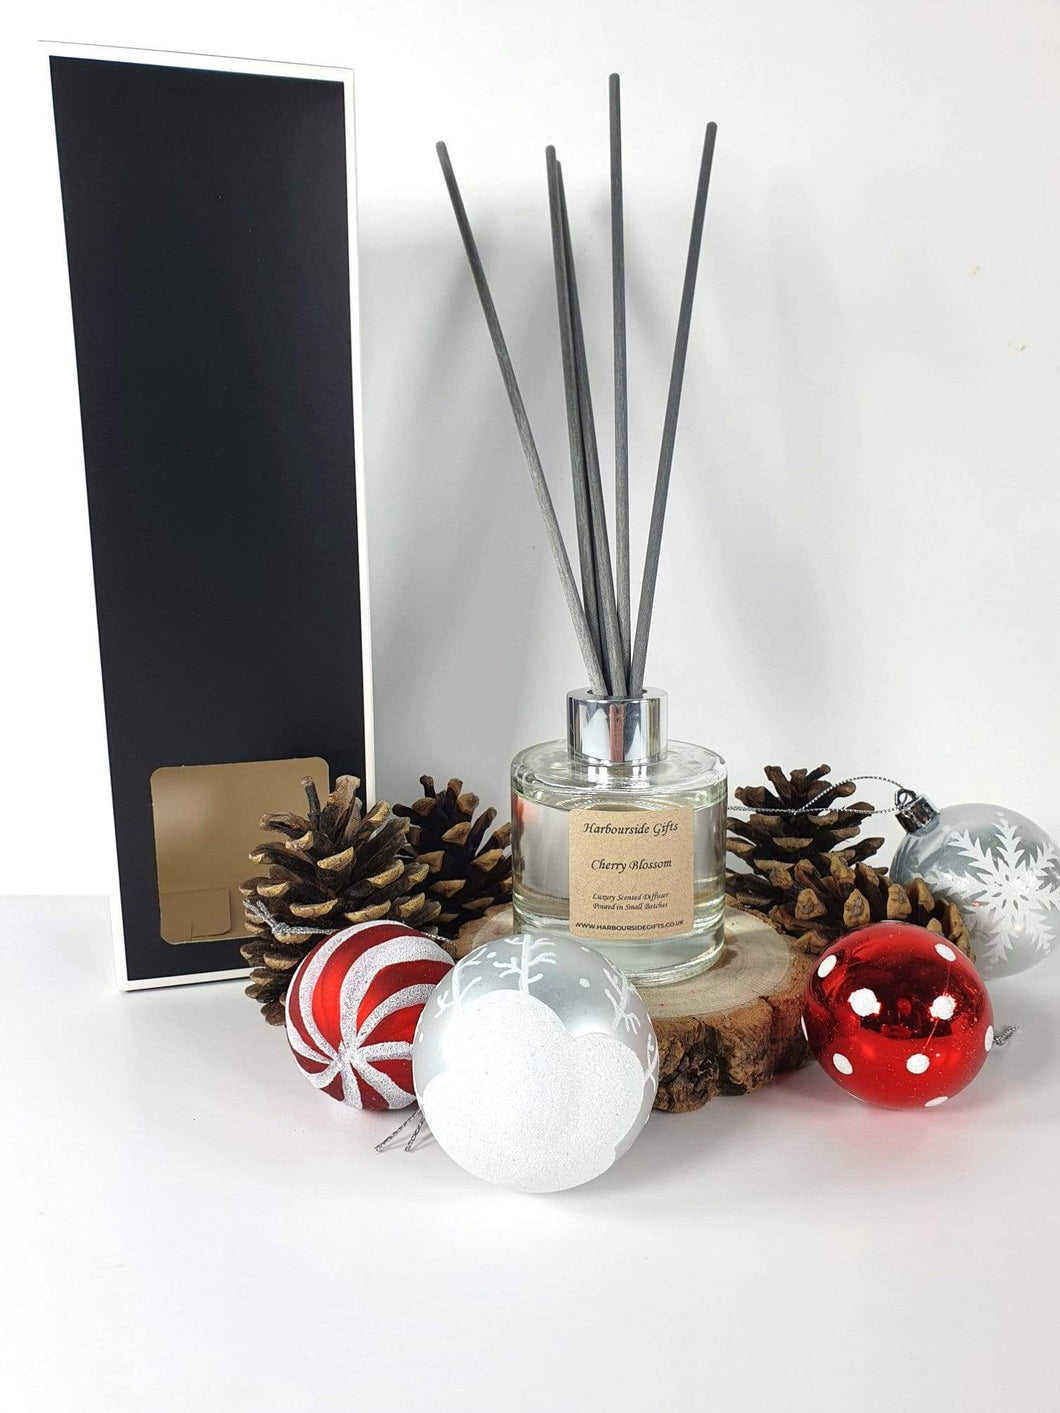 Cherry Blossom Reed Diffuser Harbourside Gifts